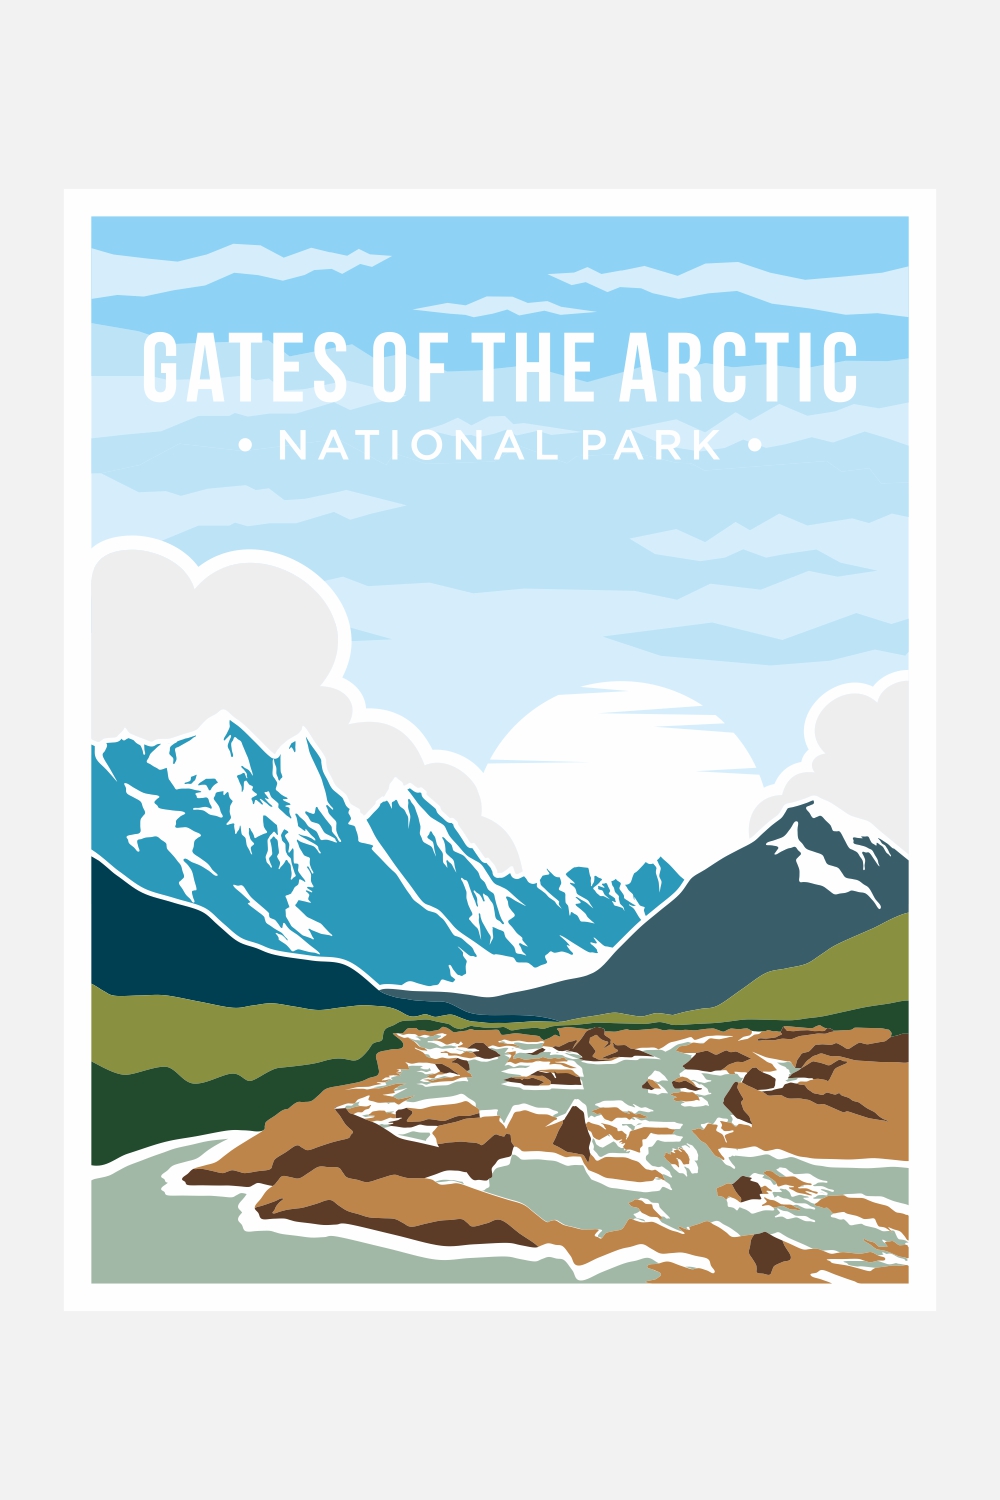 Gate of the arctic National Park poster vector illustration design – Only $8 pinterest preview image.